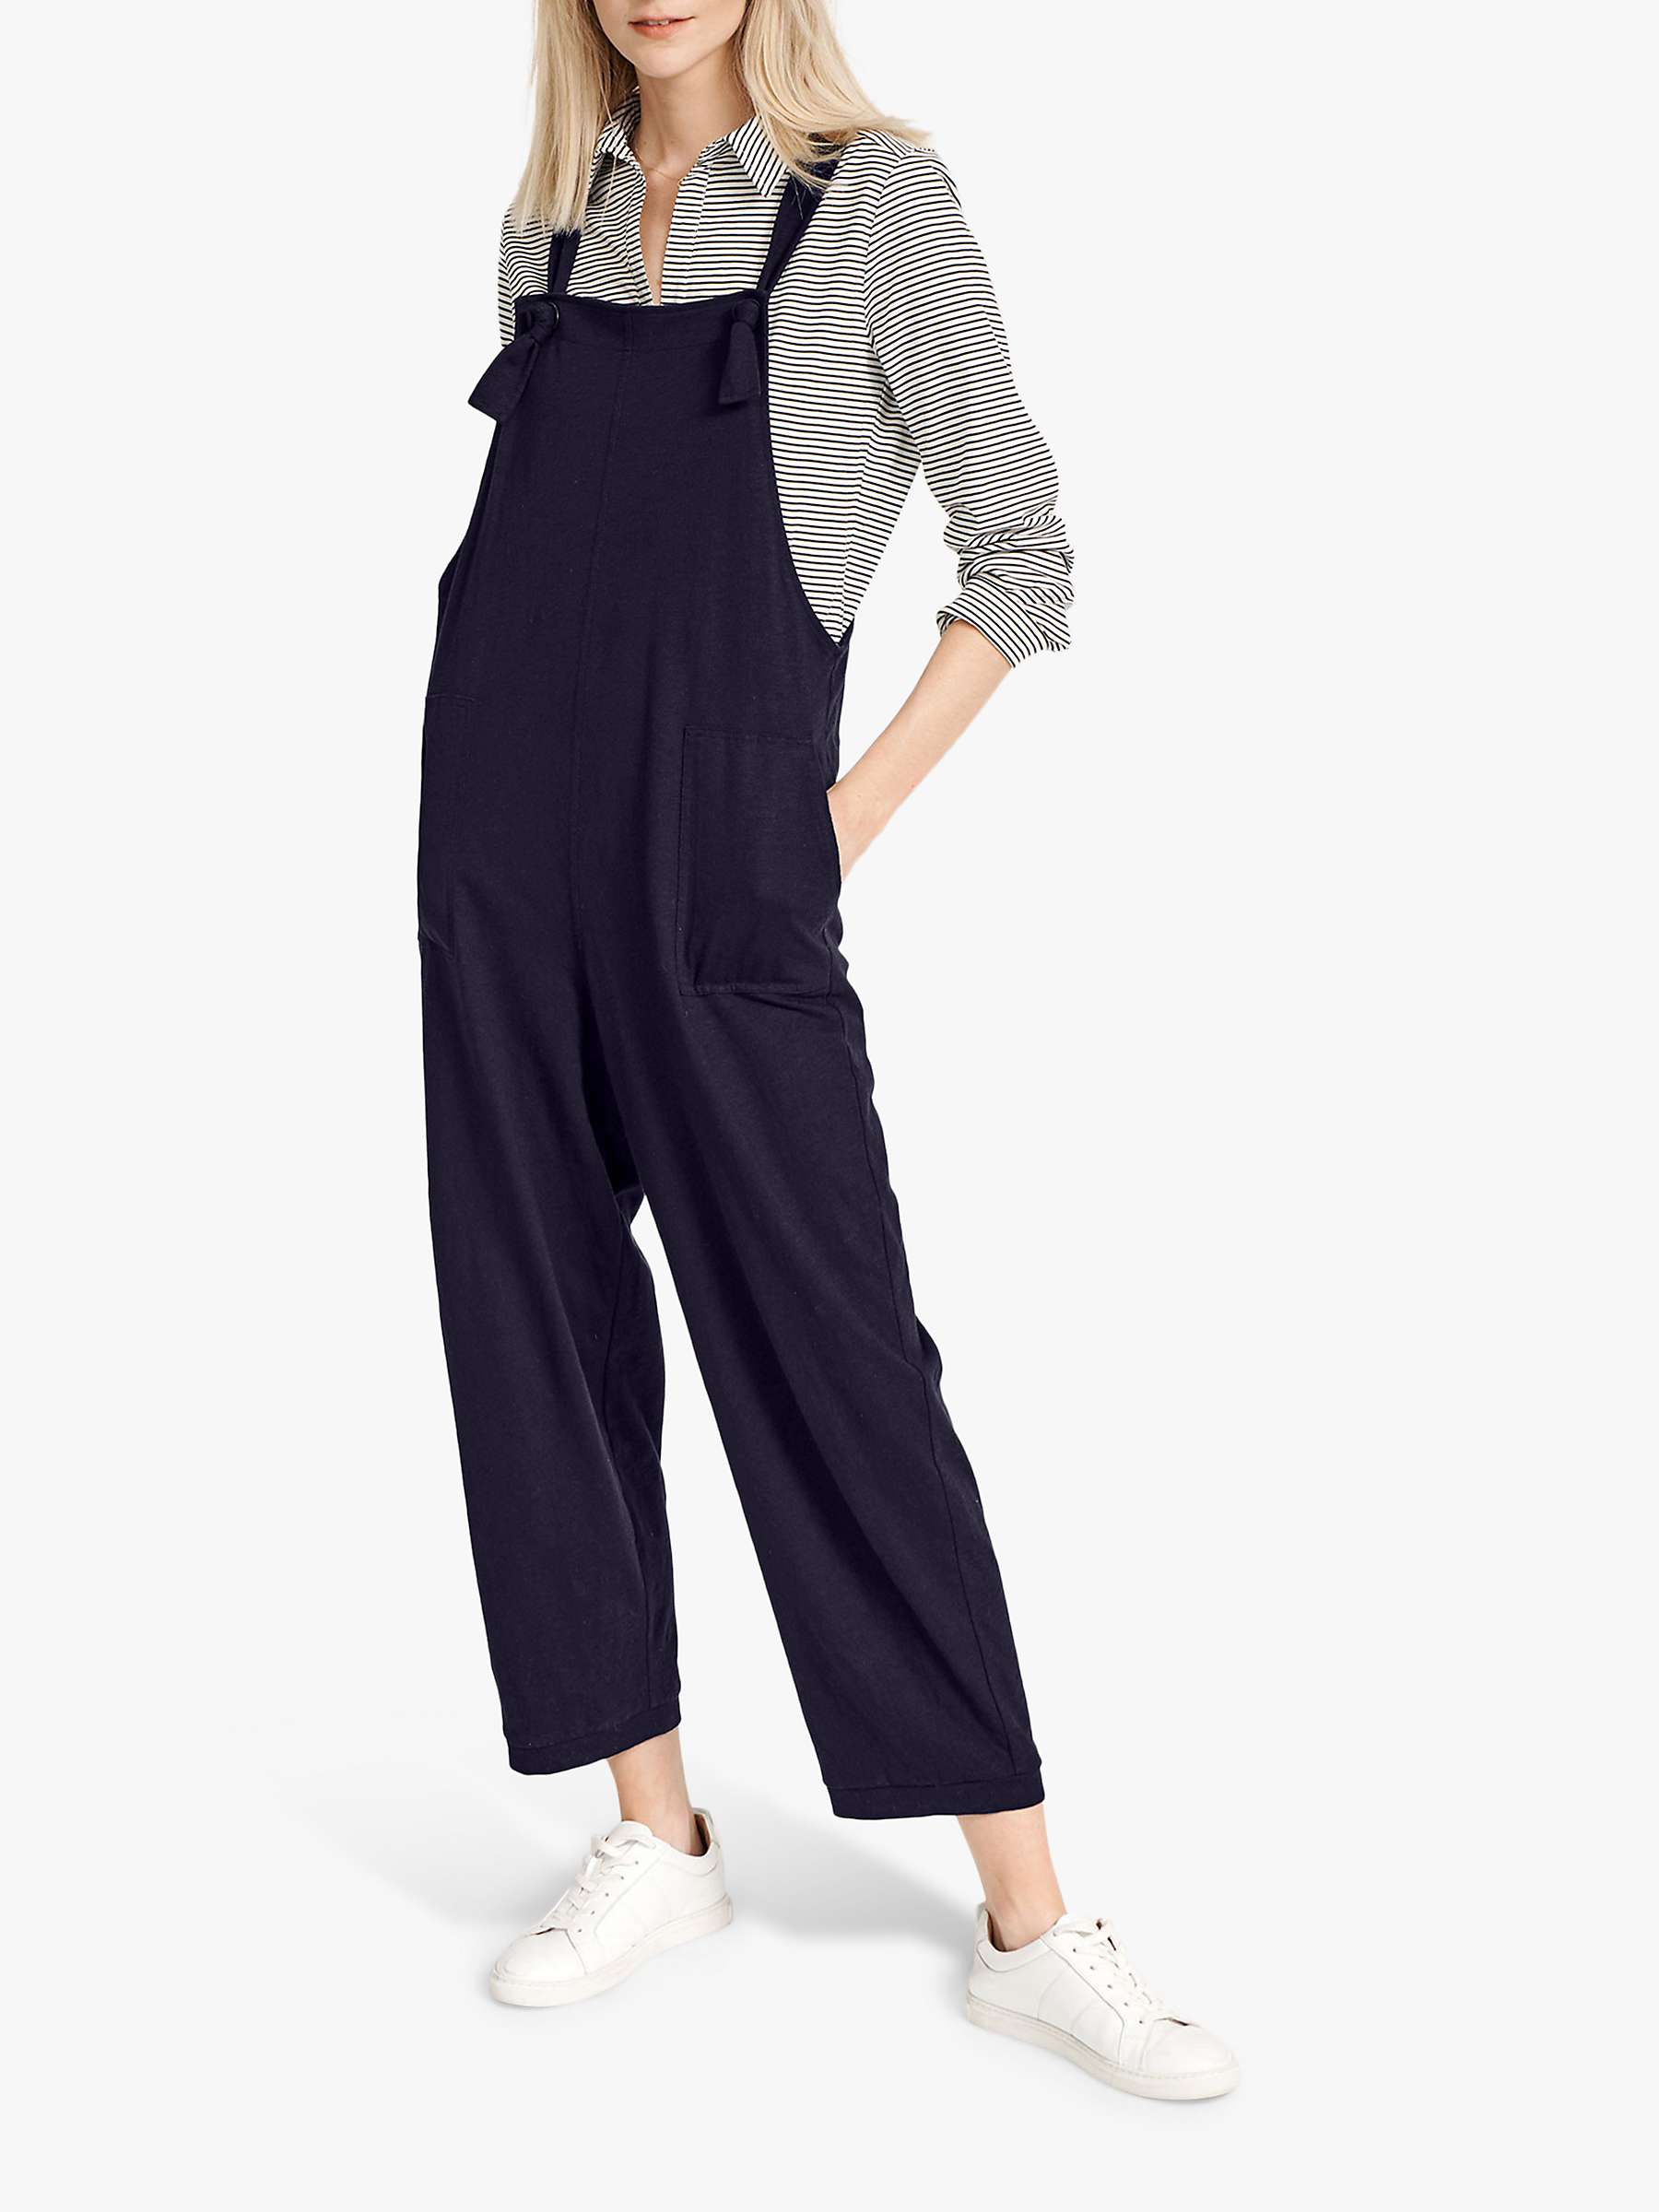 Buy NRBY Cameron Jersey Dungaree Online at johnlewis.com